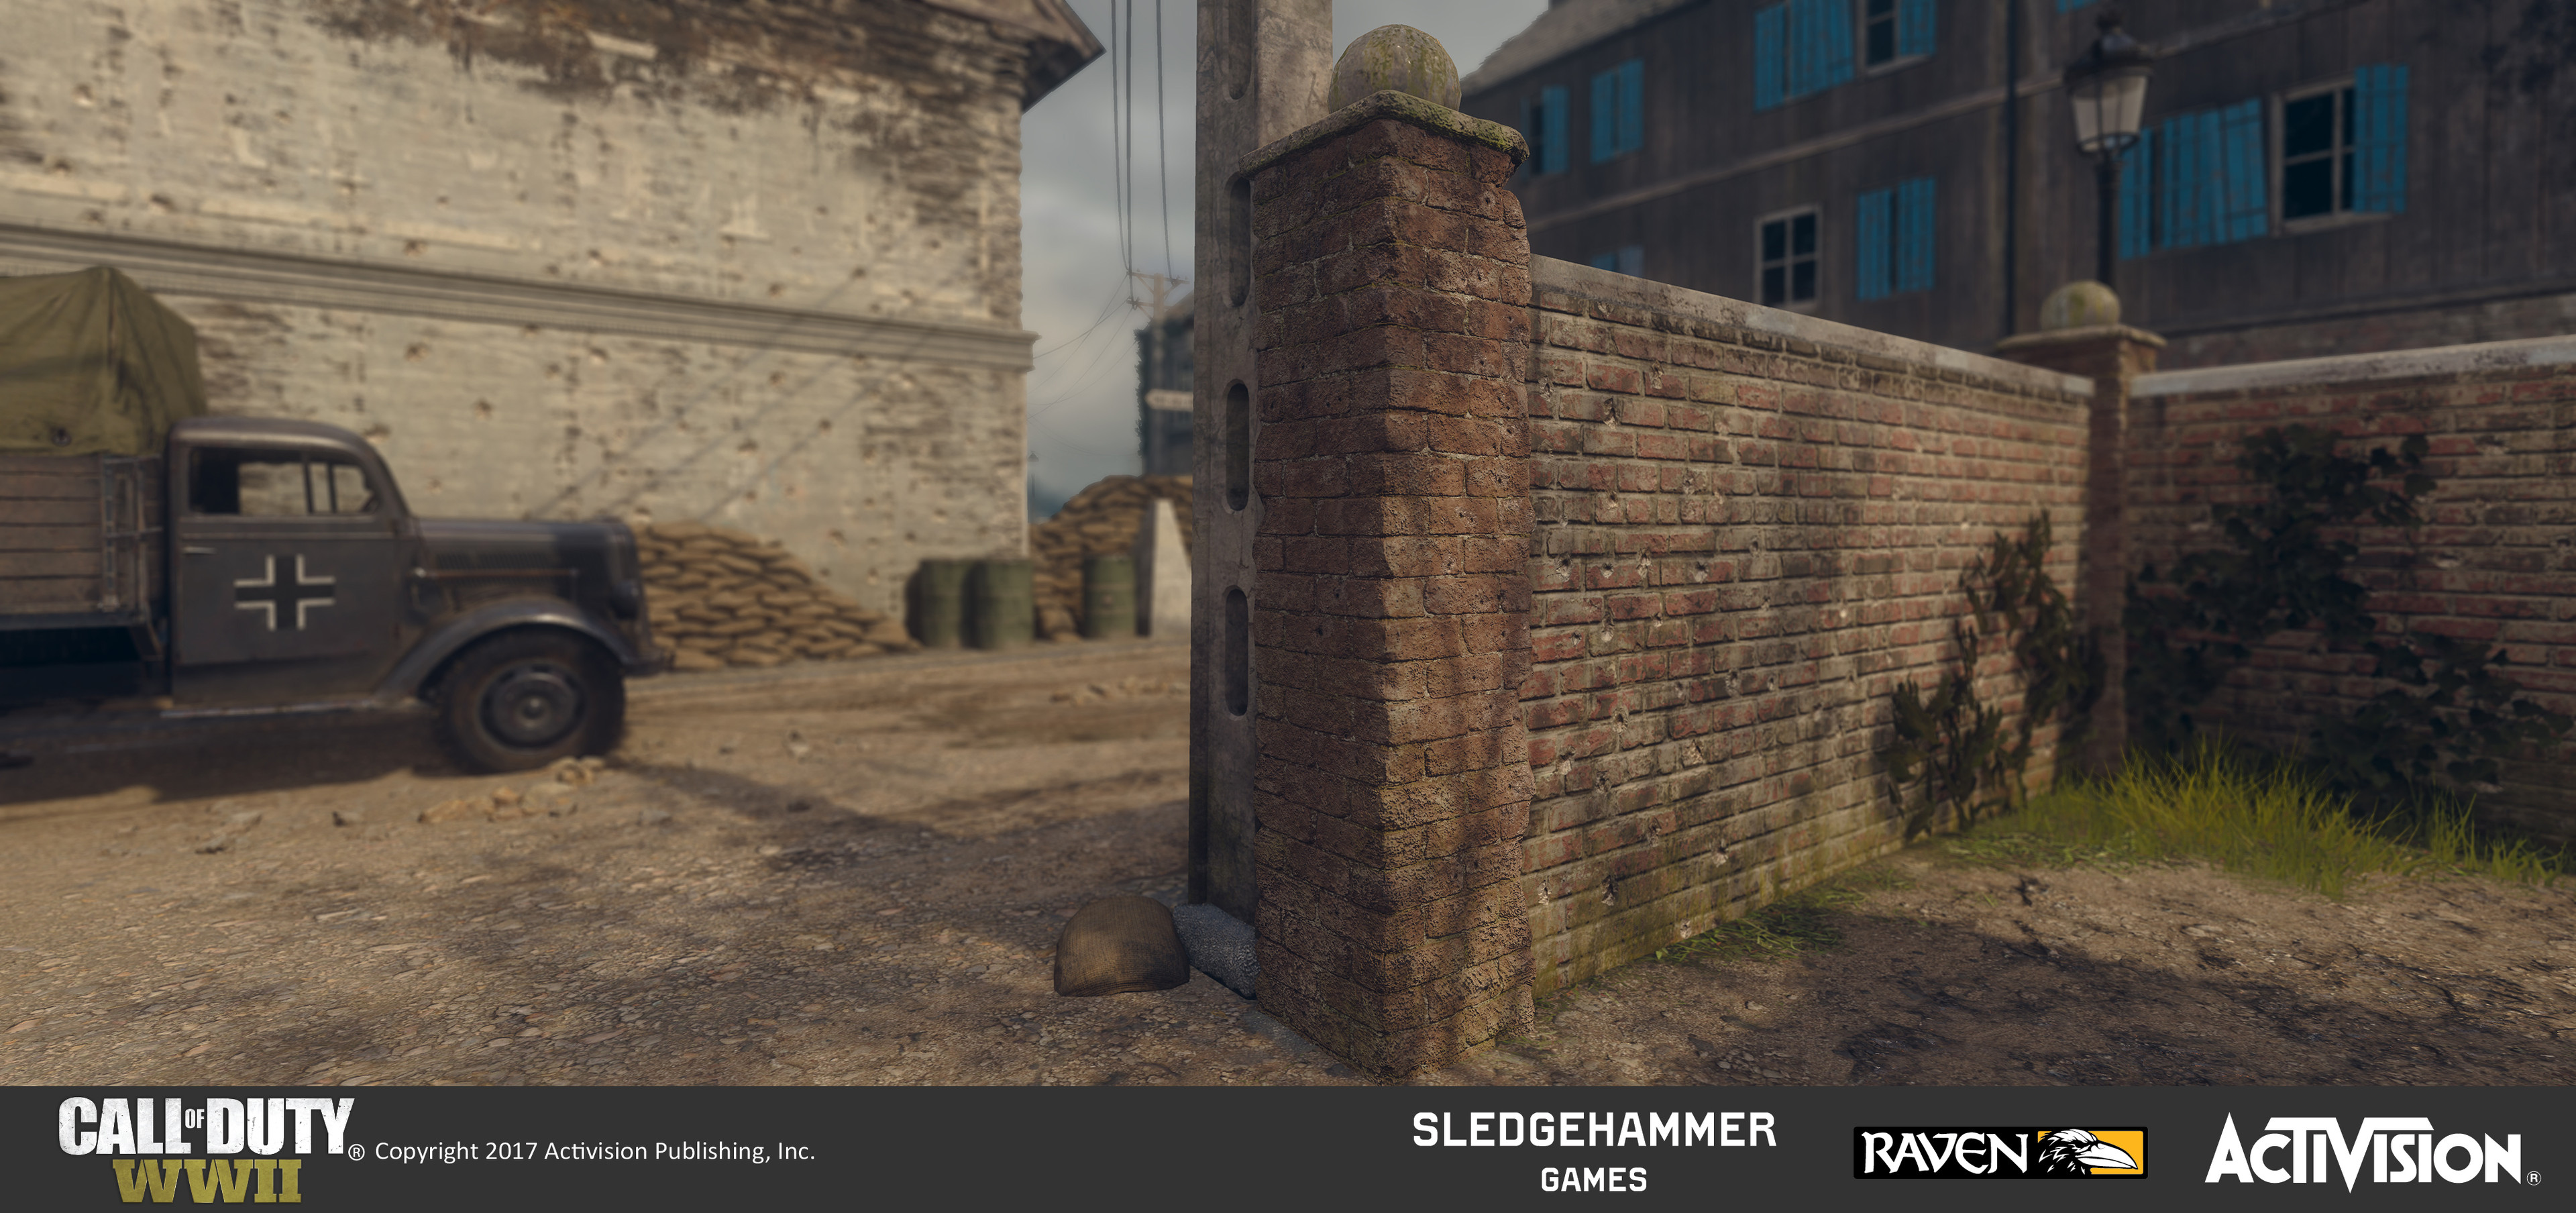 Damaged brick column model in-game. I also worked on material configuration on the house structure in the left area of the background.